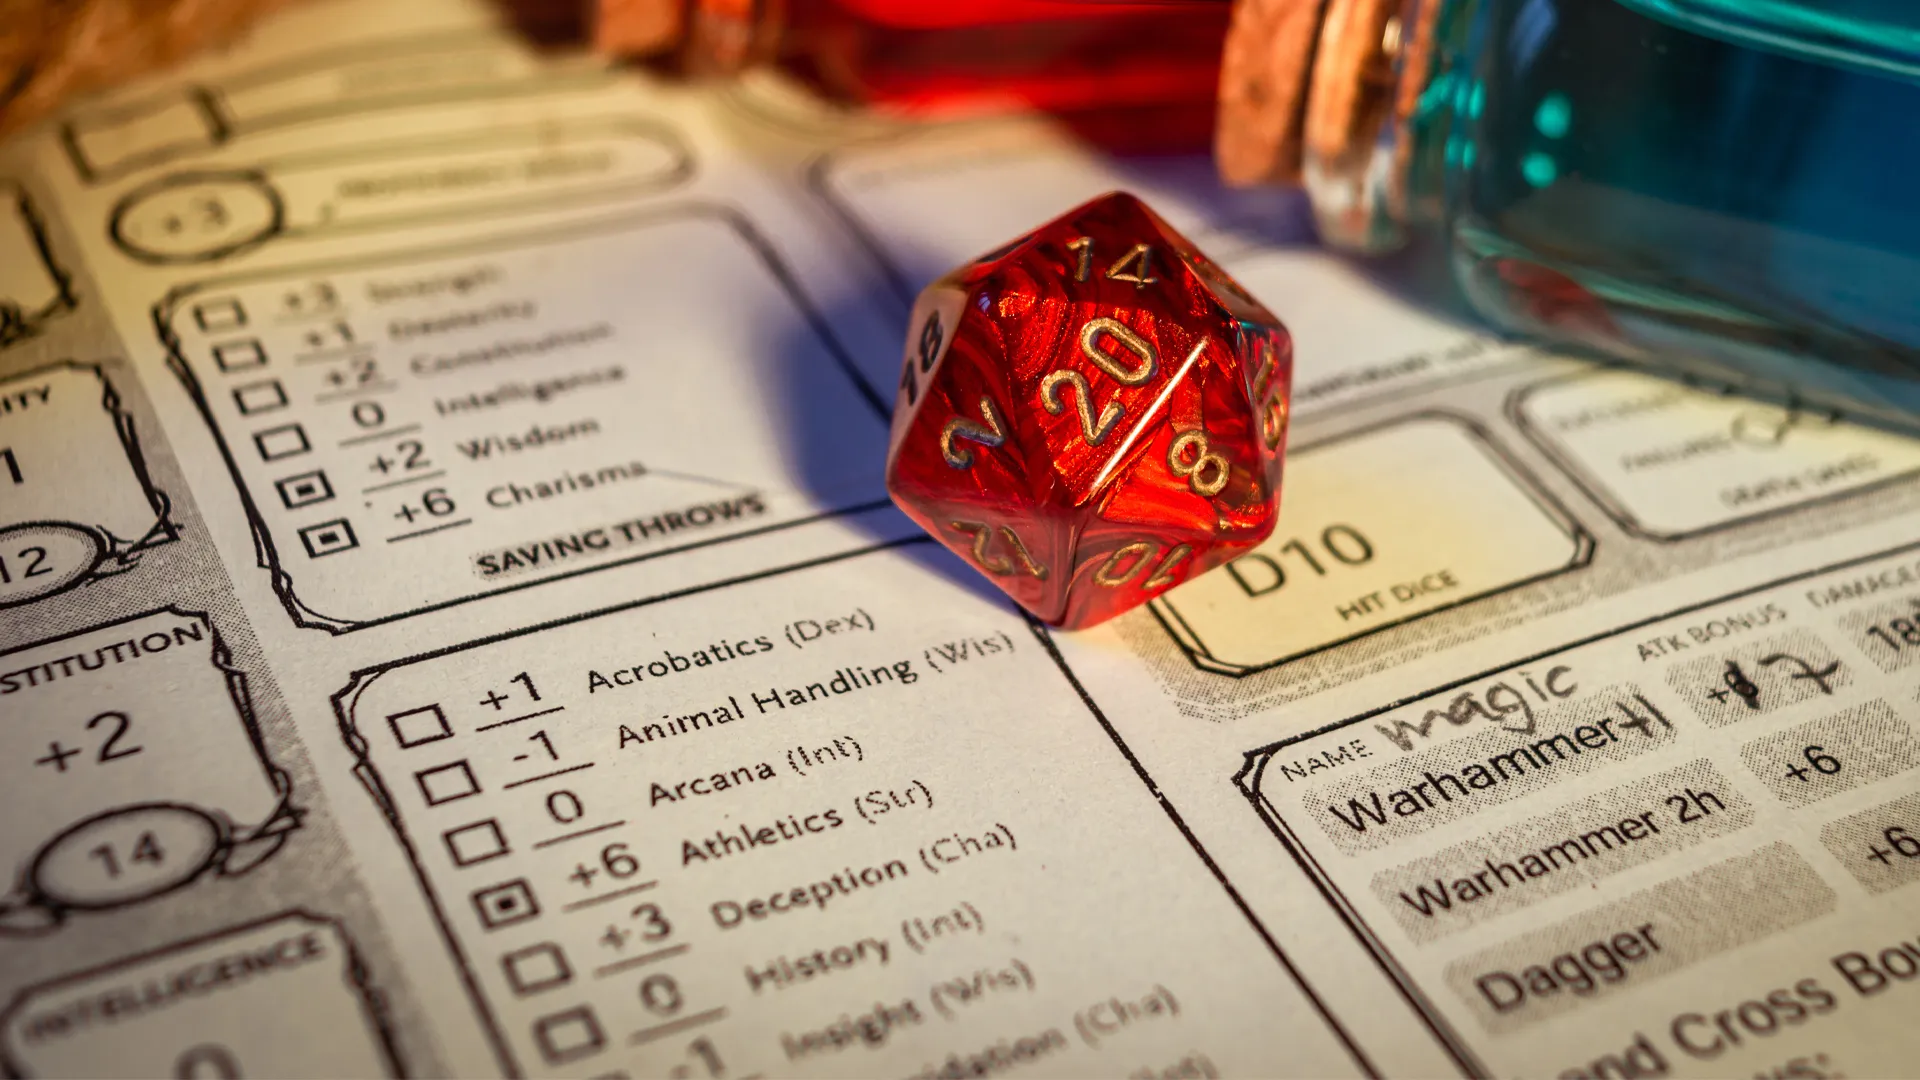 Hosted Dungeons & Dragons